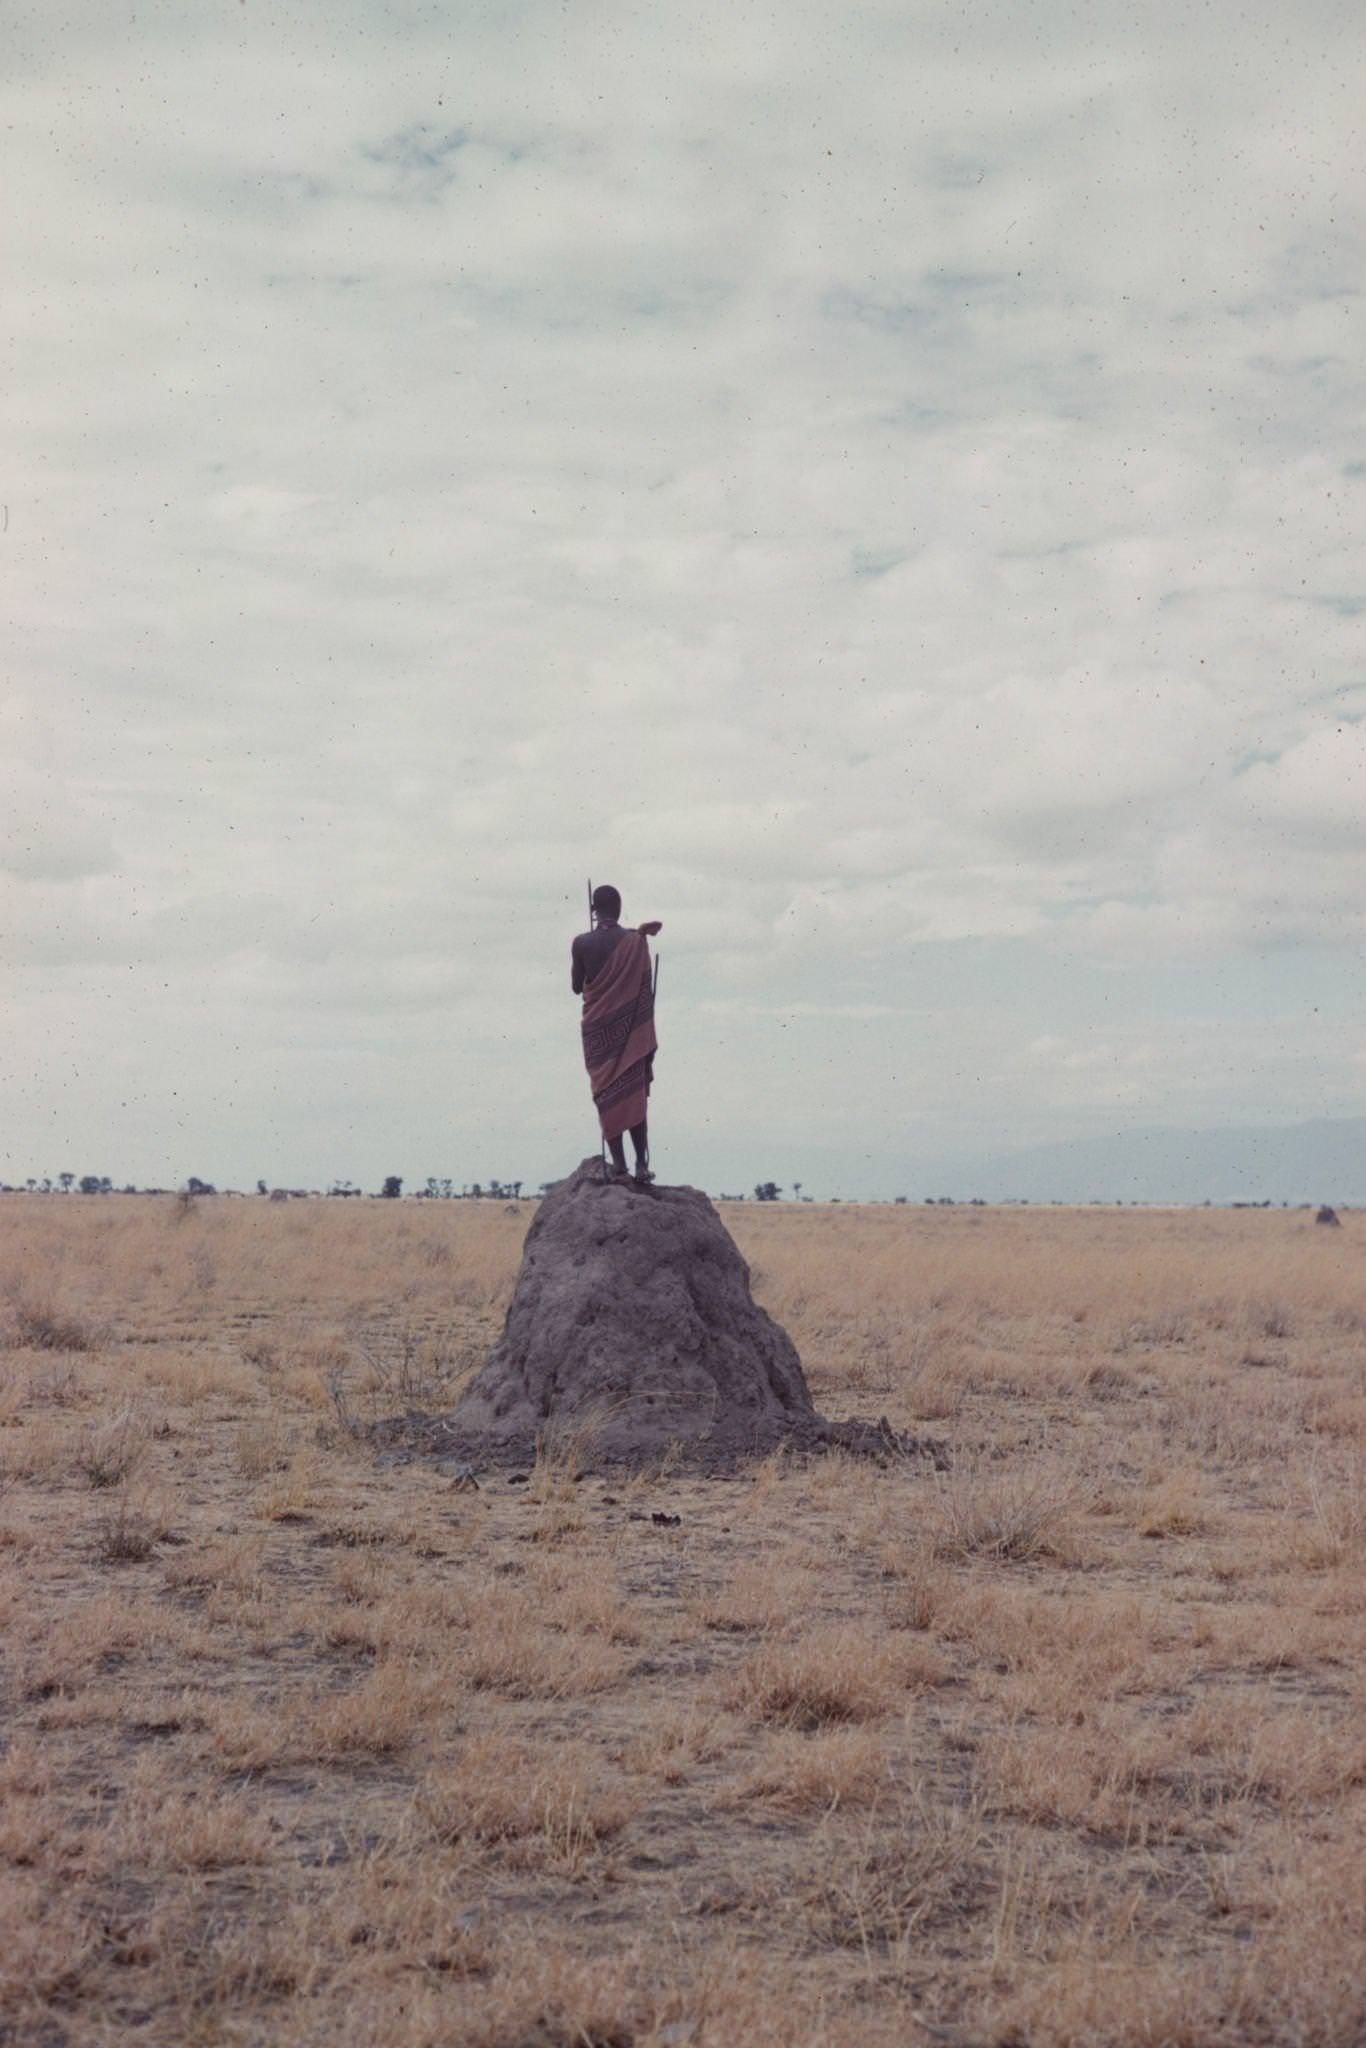 A man as he stands on an ant or termite hill and looks across a field, Tanzania, 1962.